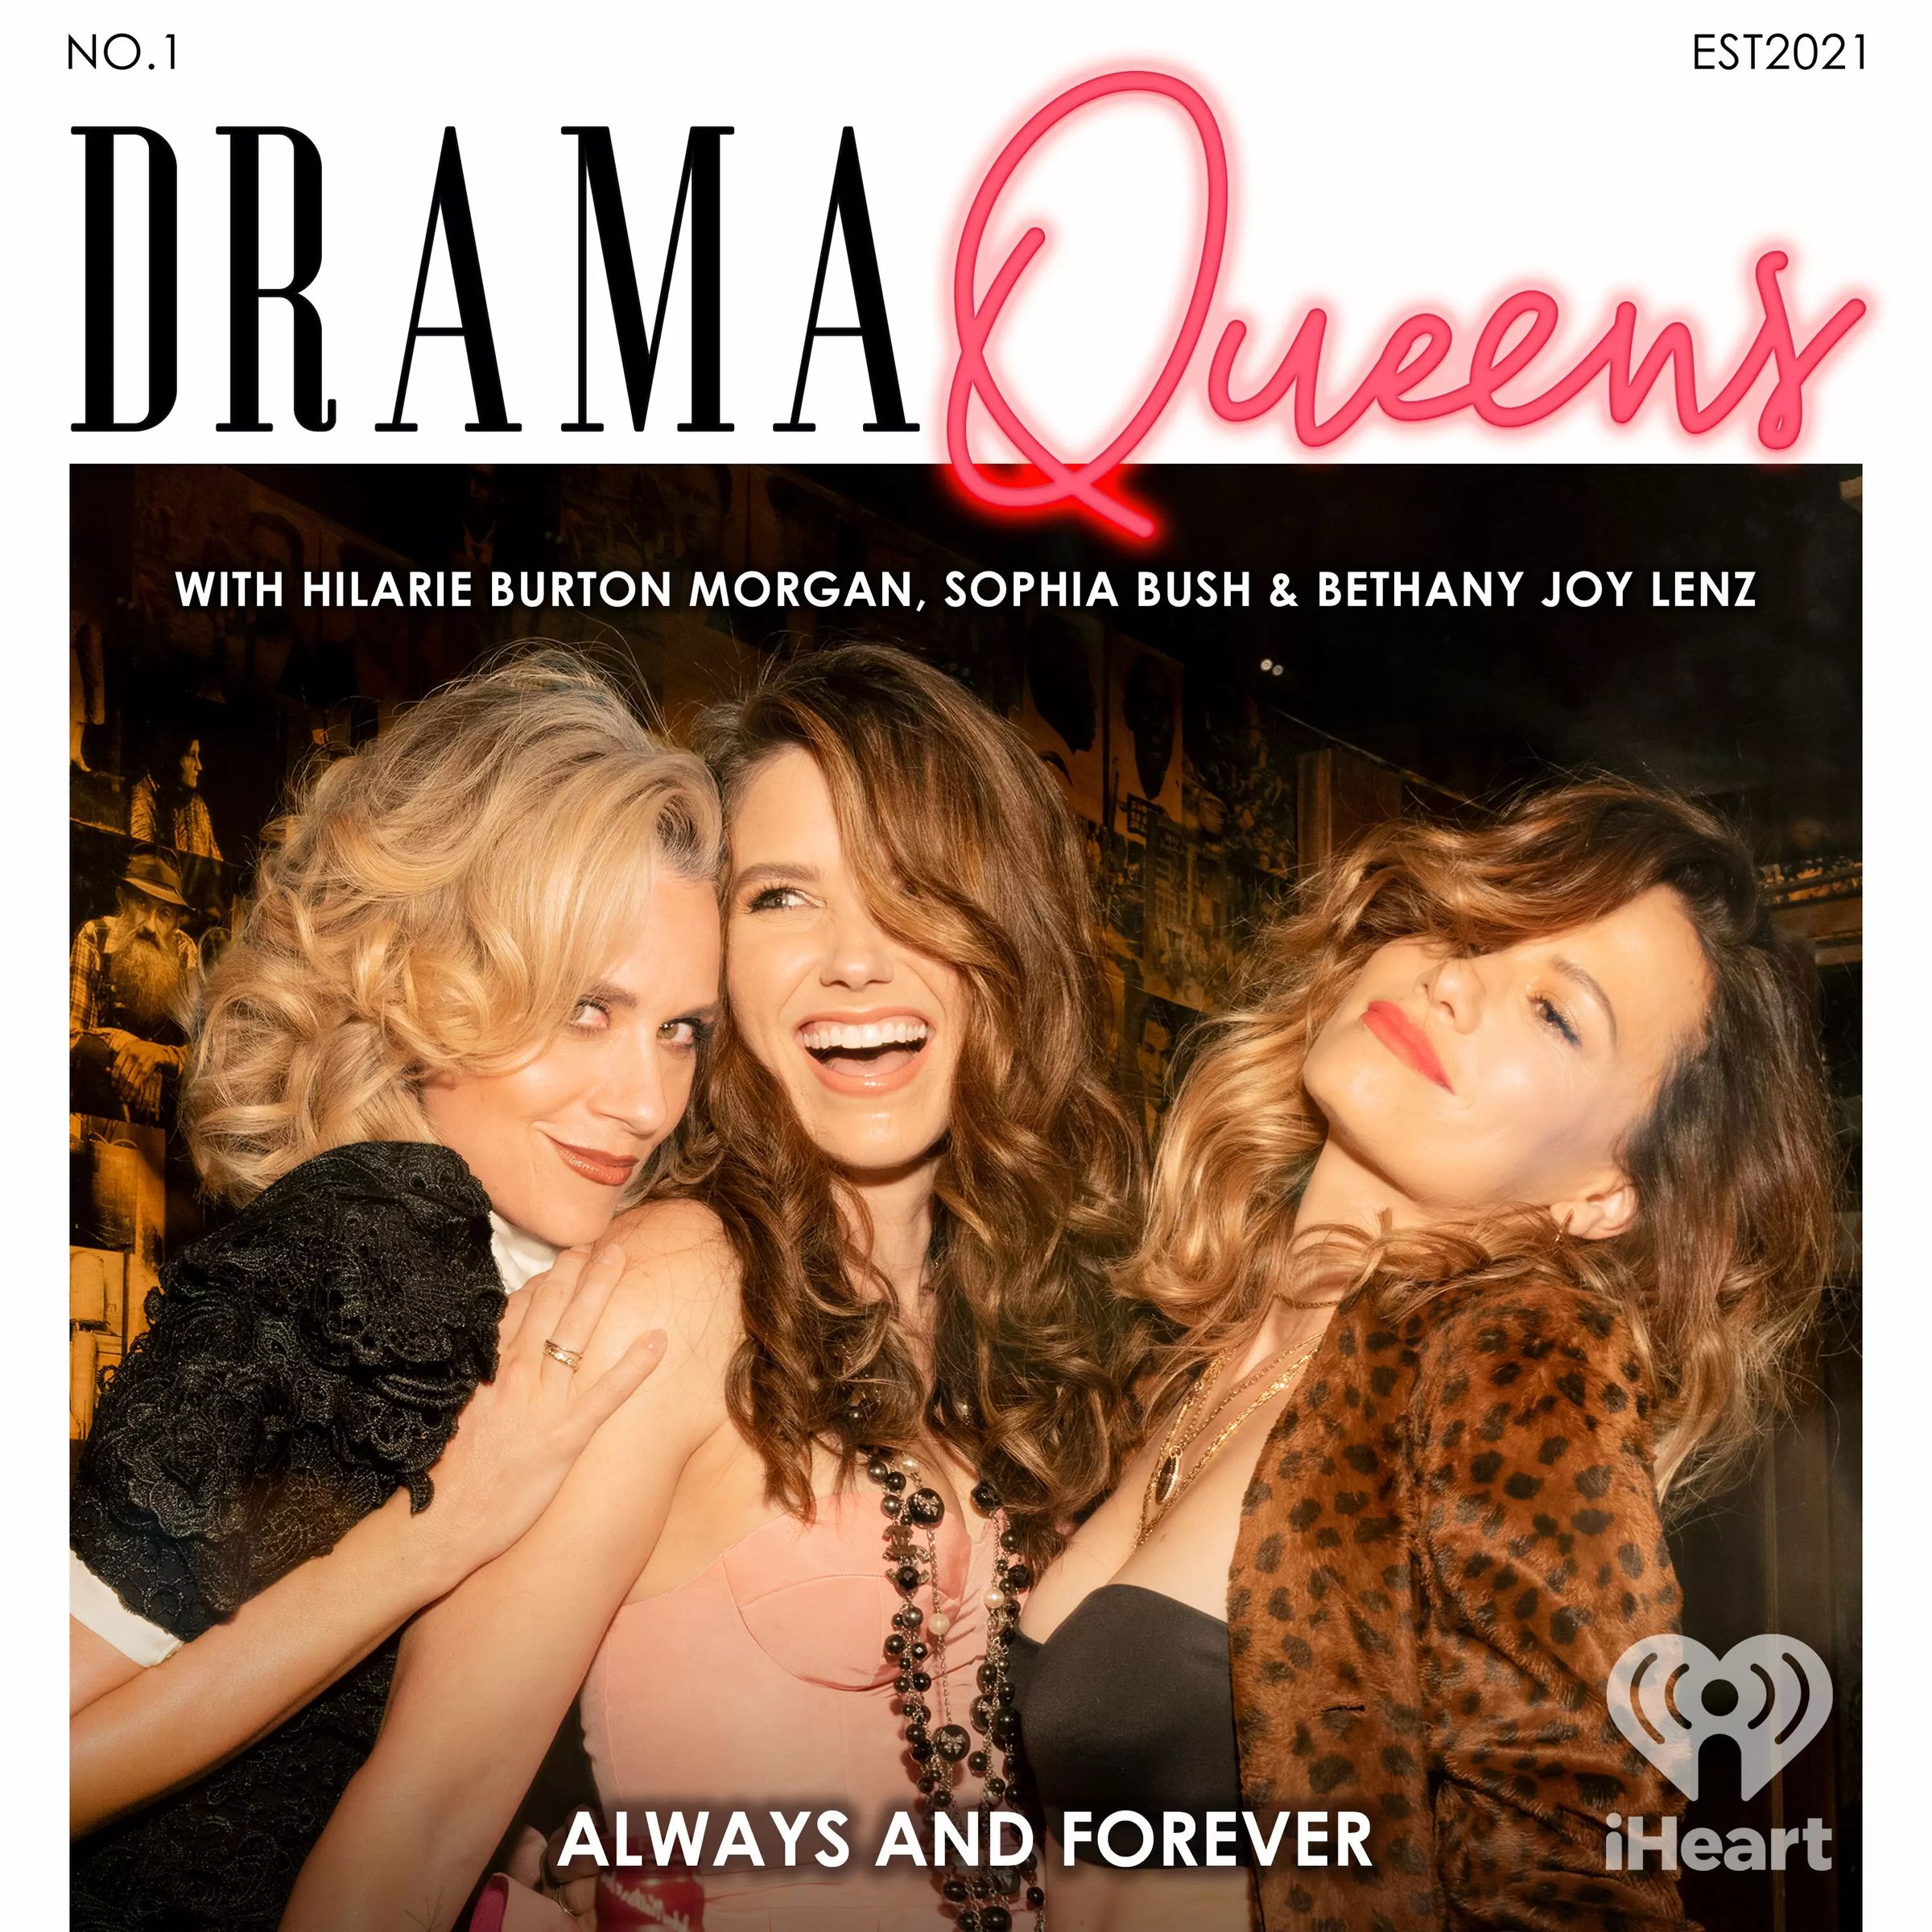 The cover art for Drama Queens.